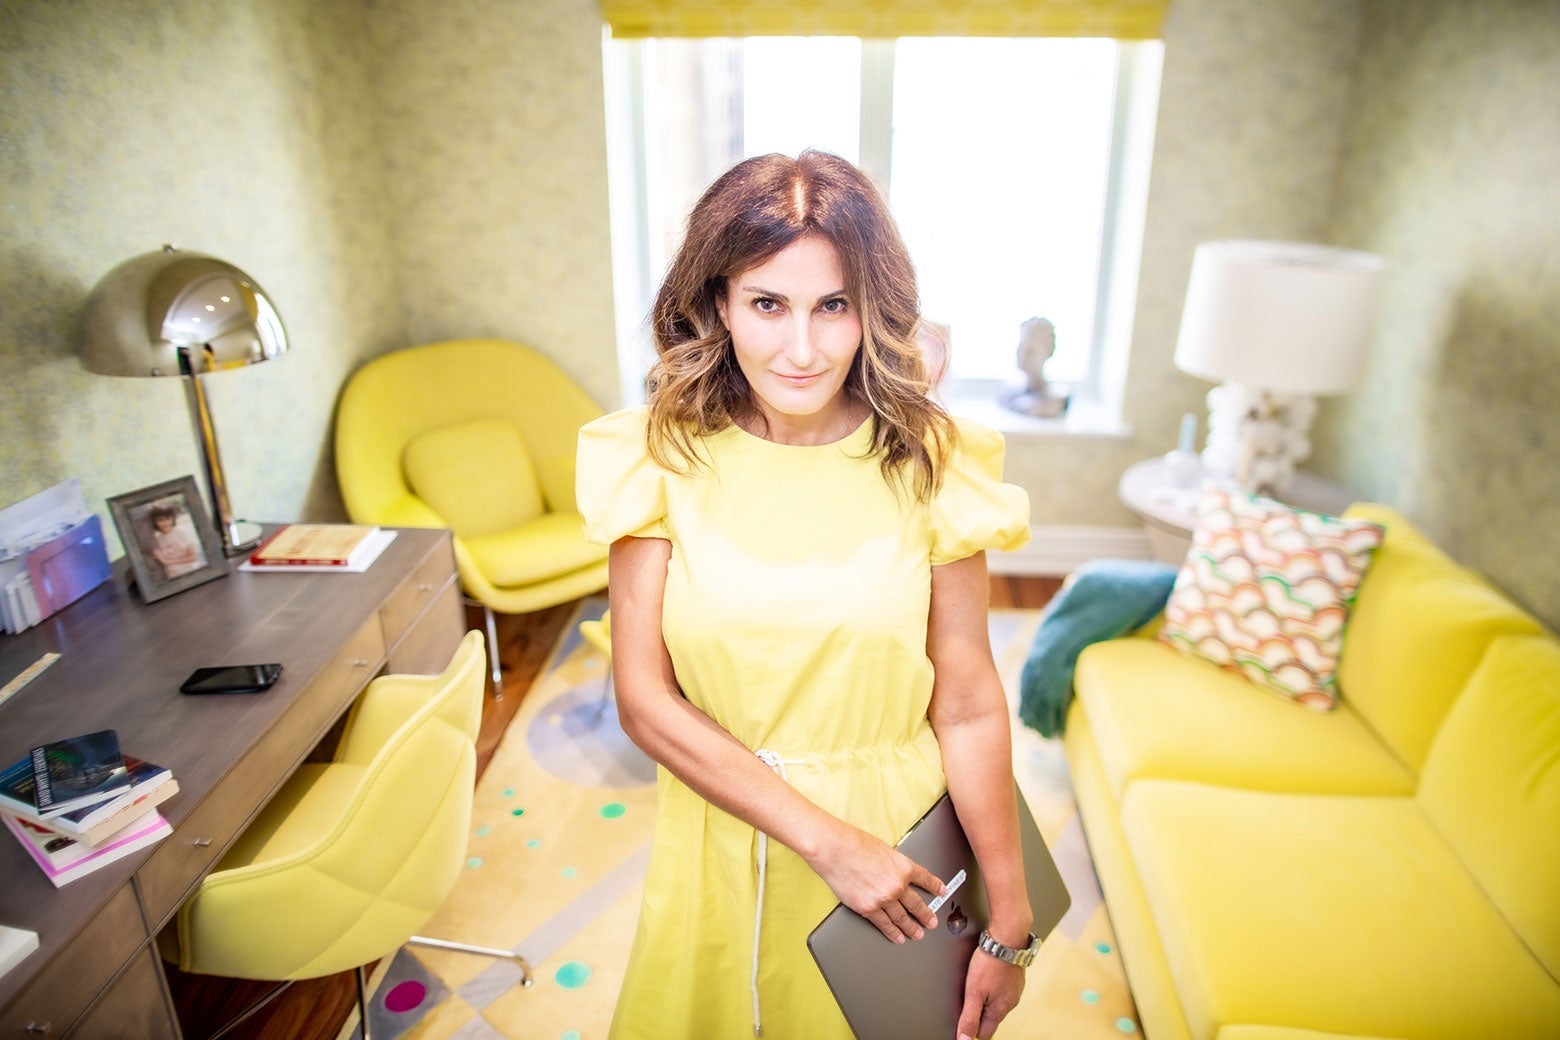 A woman in a yellow dress holds an Apple laptop while standing in a yellow room. 